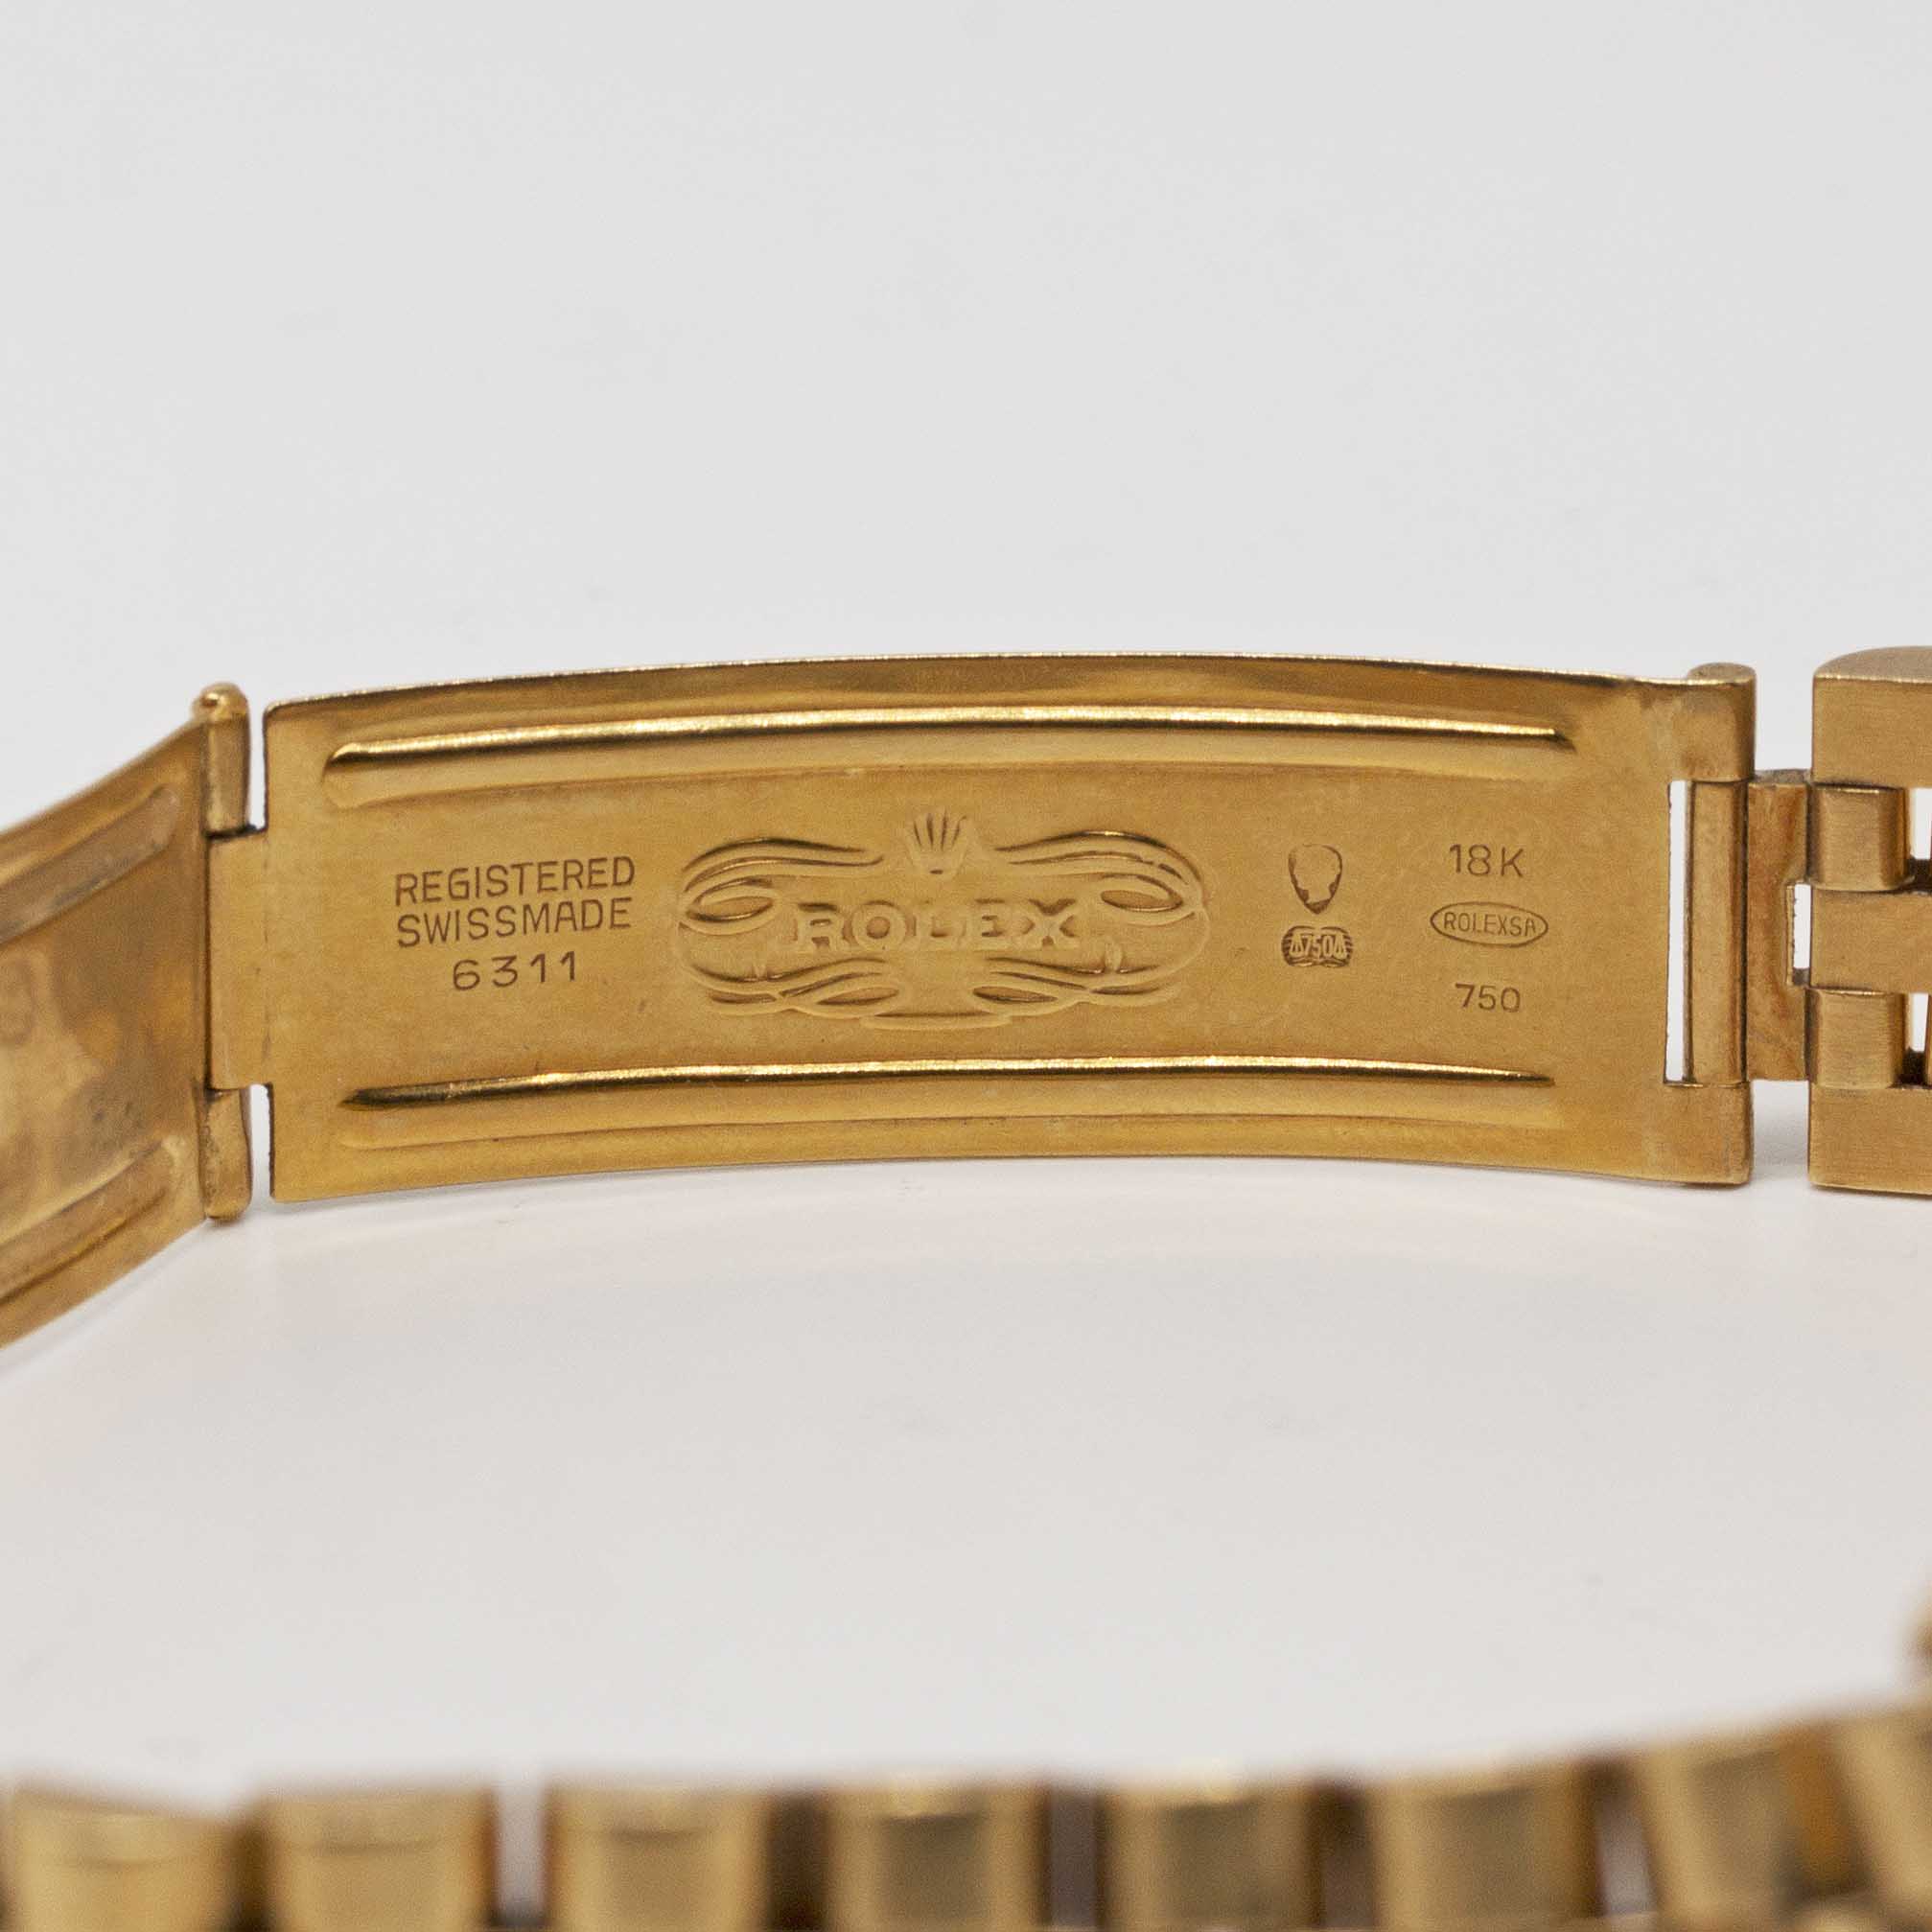 A MID SIZE 18K SOLID GOLD ROLEX OYSTER PERPETUAL DATEJUST BRACELET WATCH CIRCA 1979, REF. 6827 - Image 6 of 6